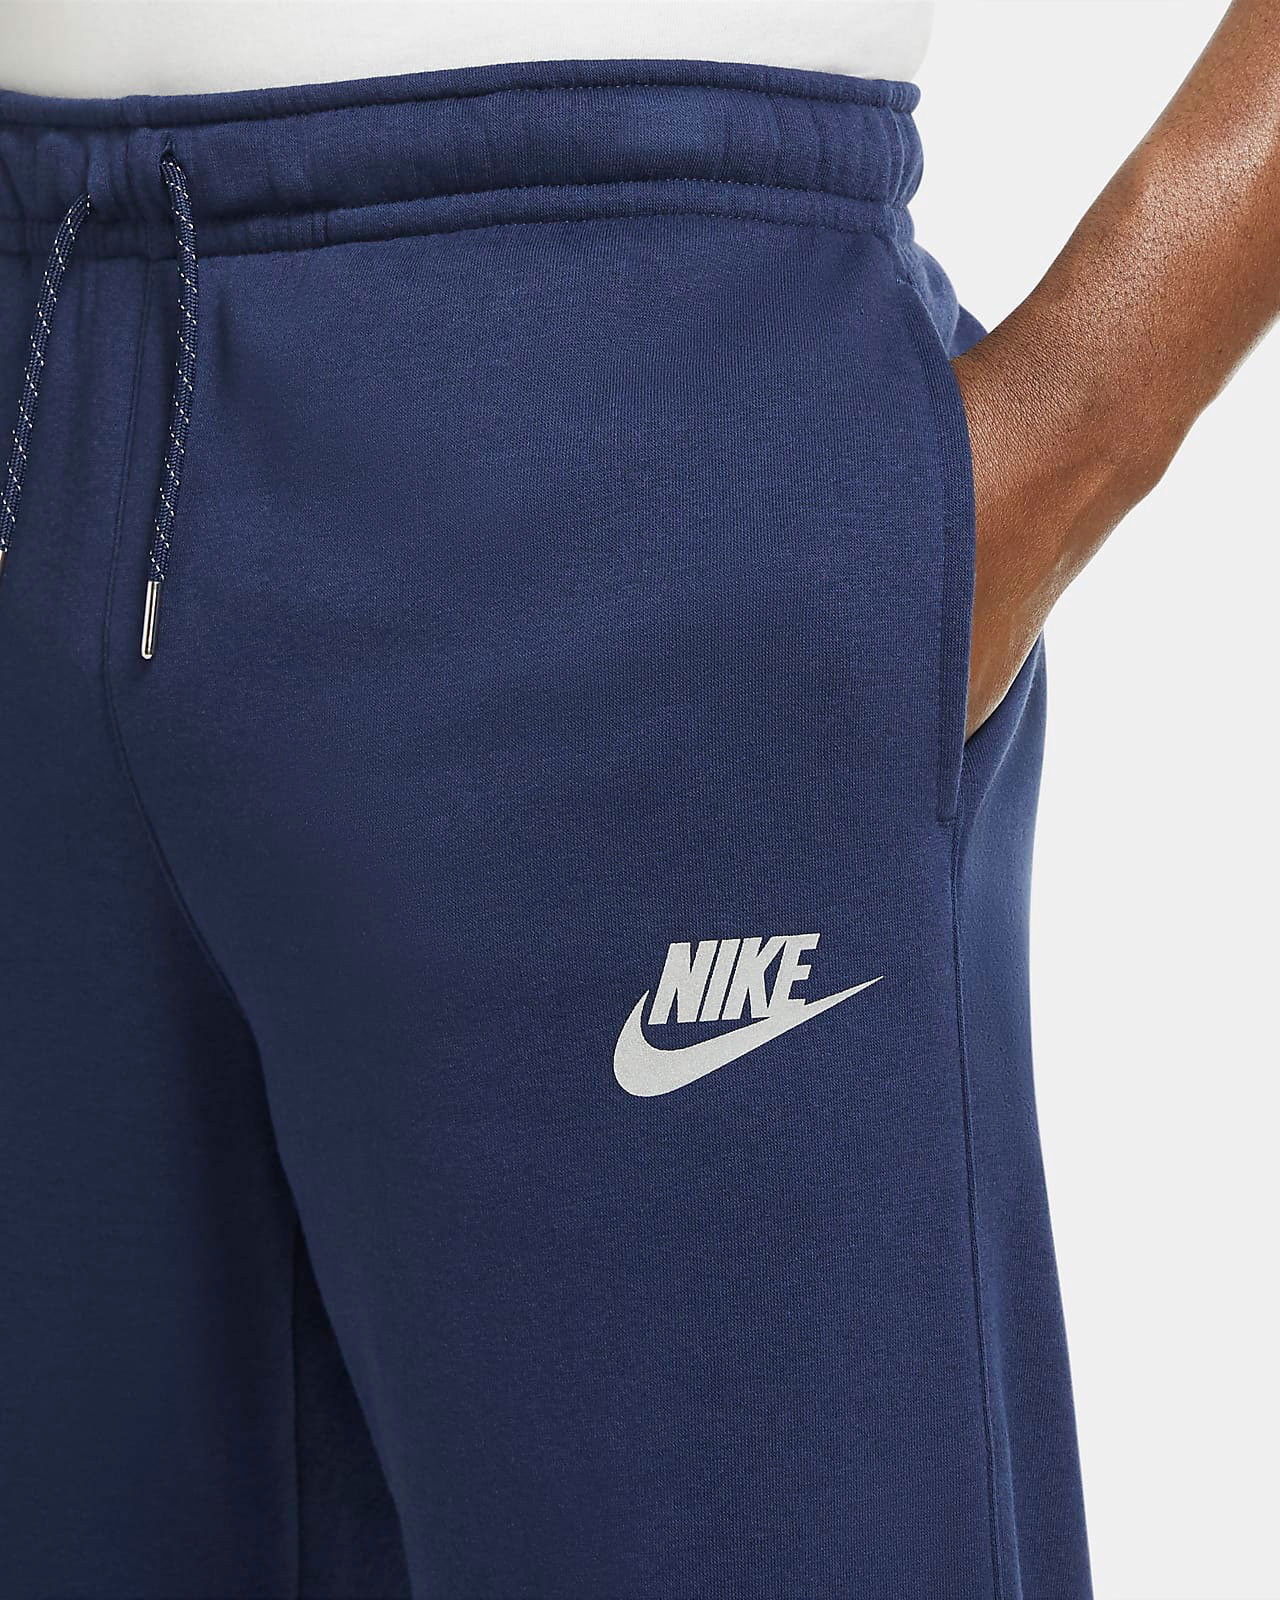 Nike Midnight Navy Sneakers and Apparel | SneakerFits.com